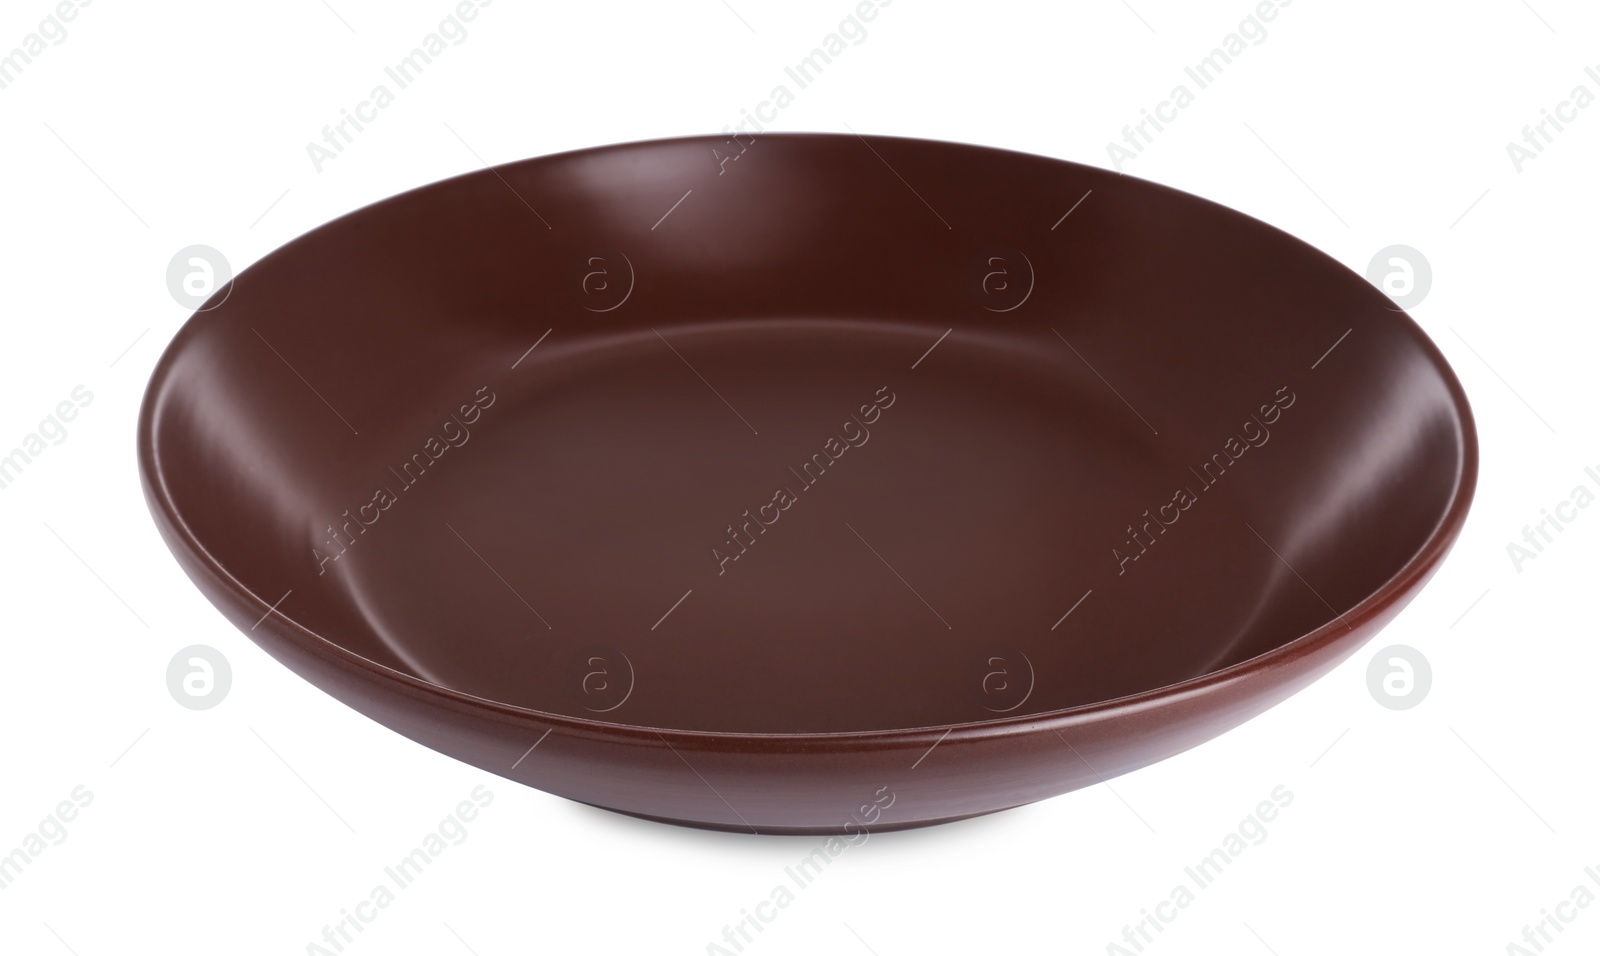 Photo of Empty brown ceramic plate isolated on white